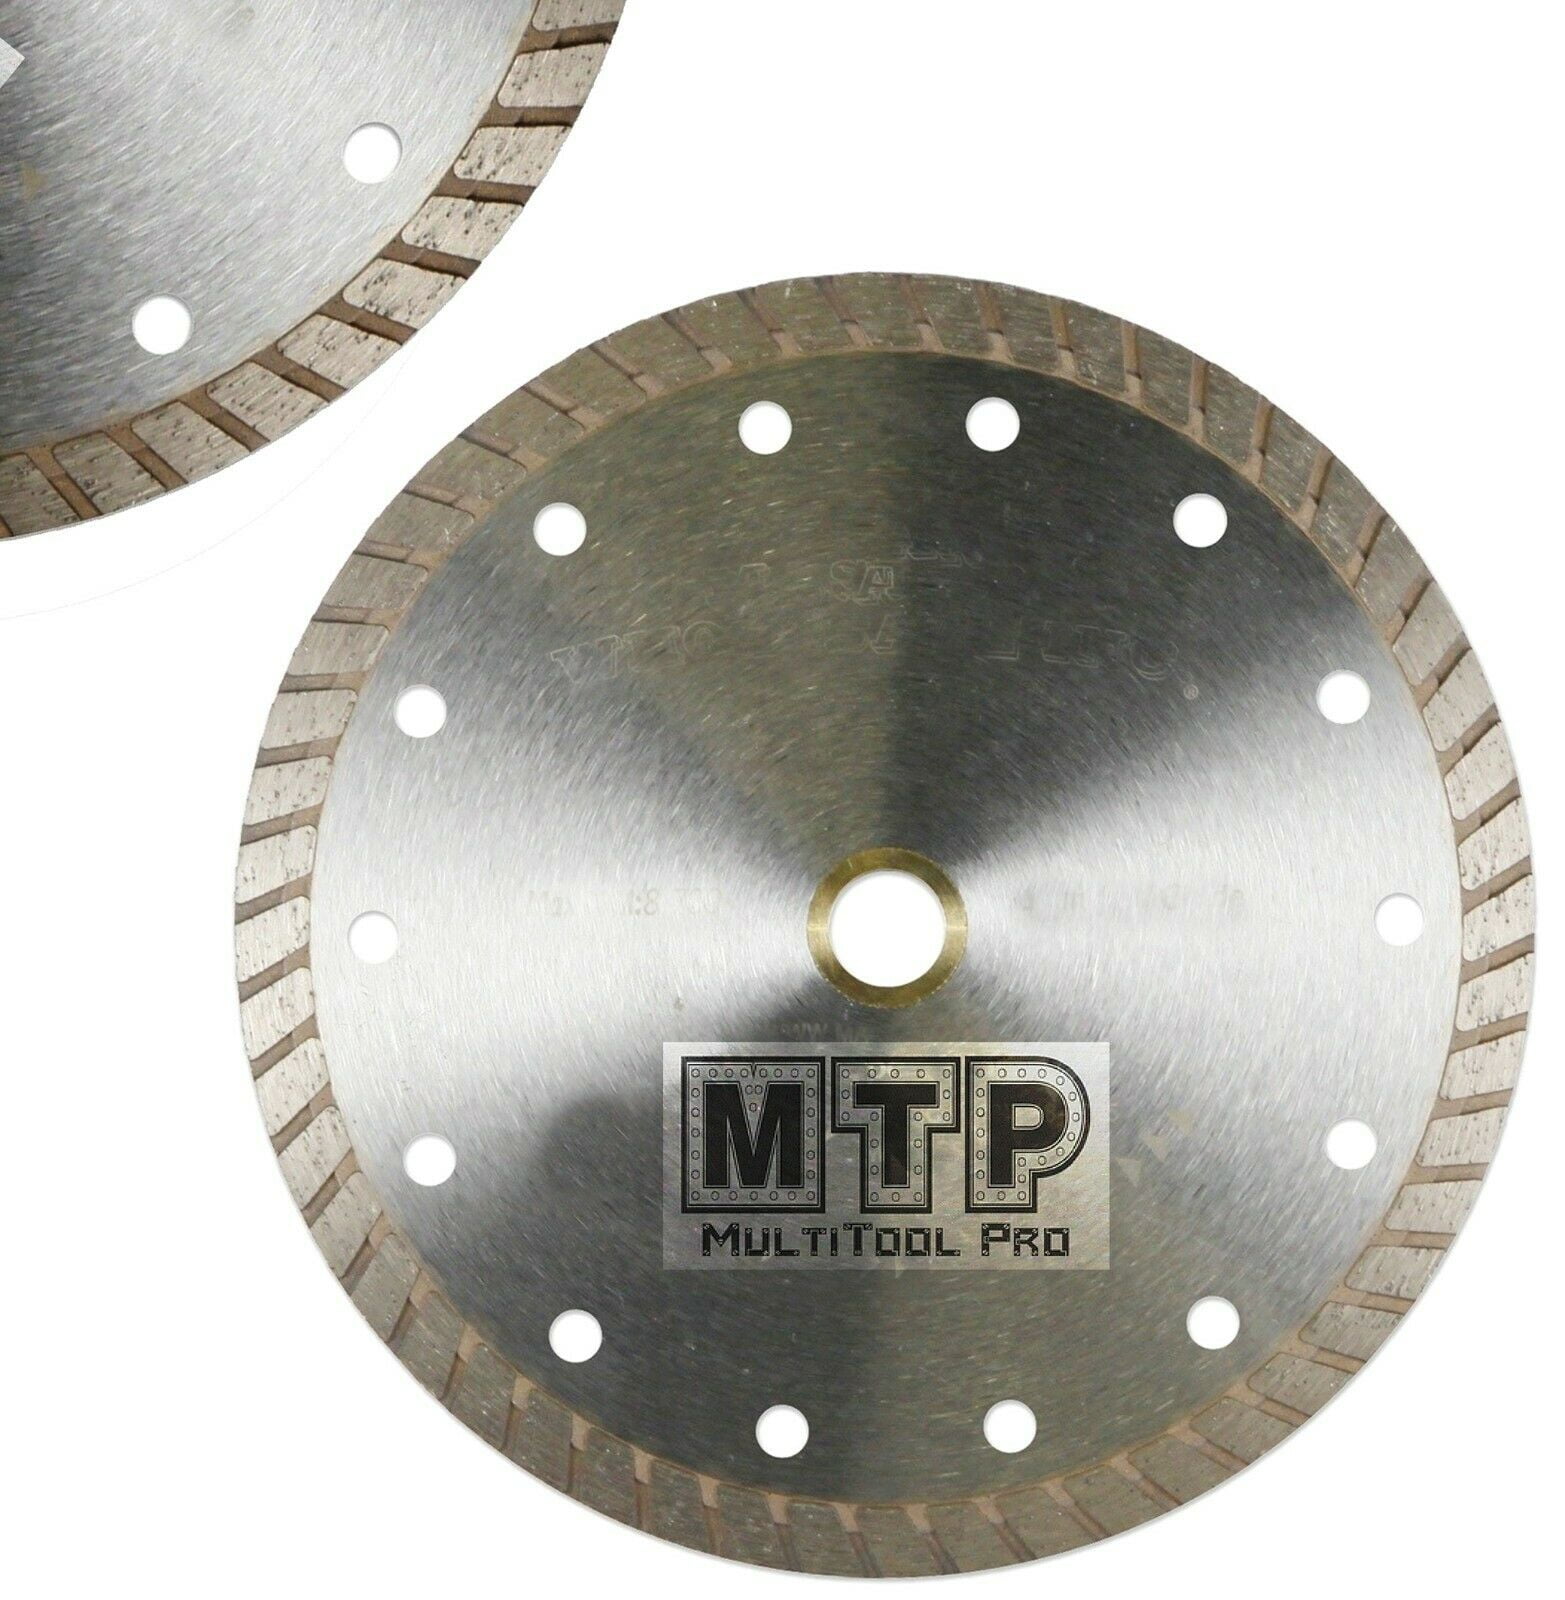 7-inch Dry or Wet Turbo Saw Blade with 5/8-inch Arbor for Masonry 